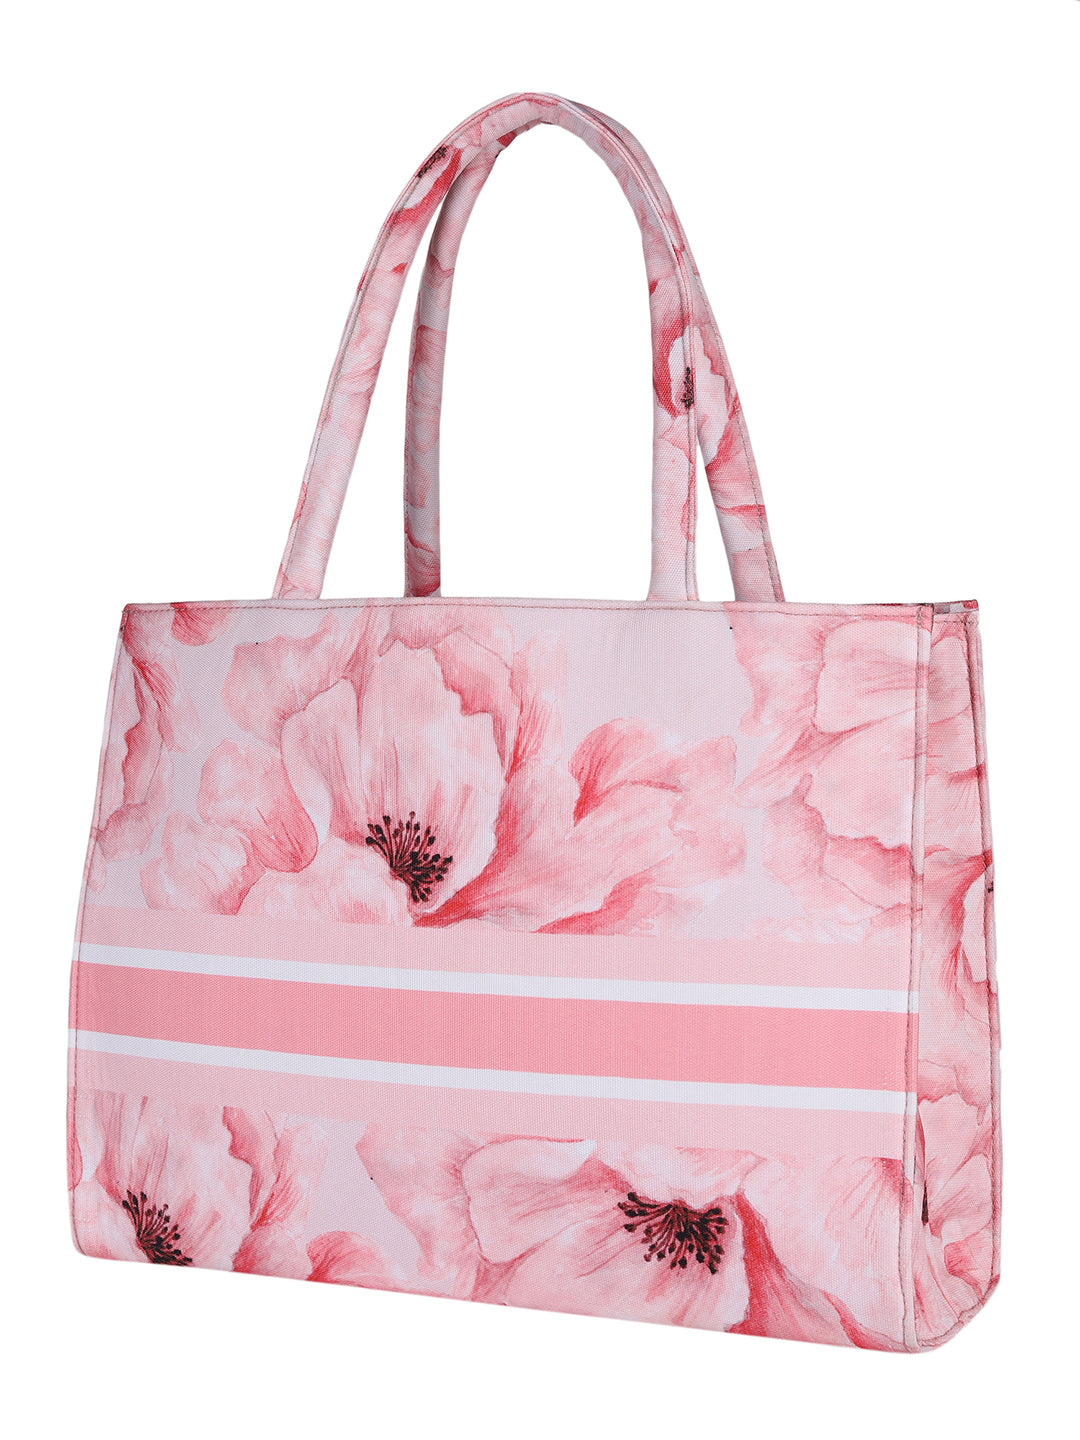 Women's Graphic Printed Canvas Tote Bag(MWCUS015)